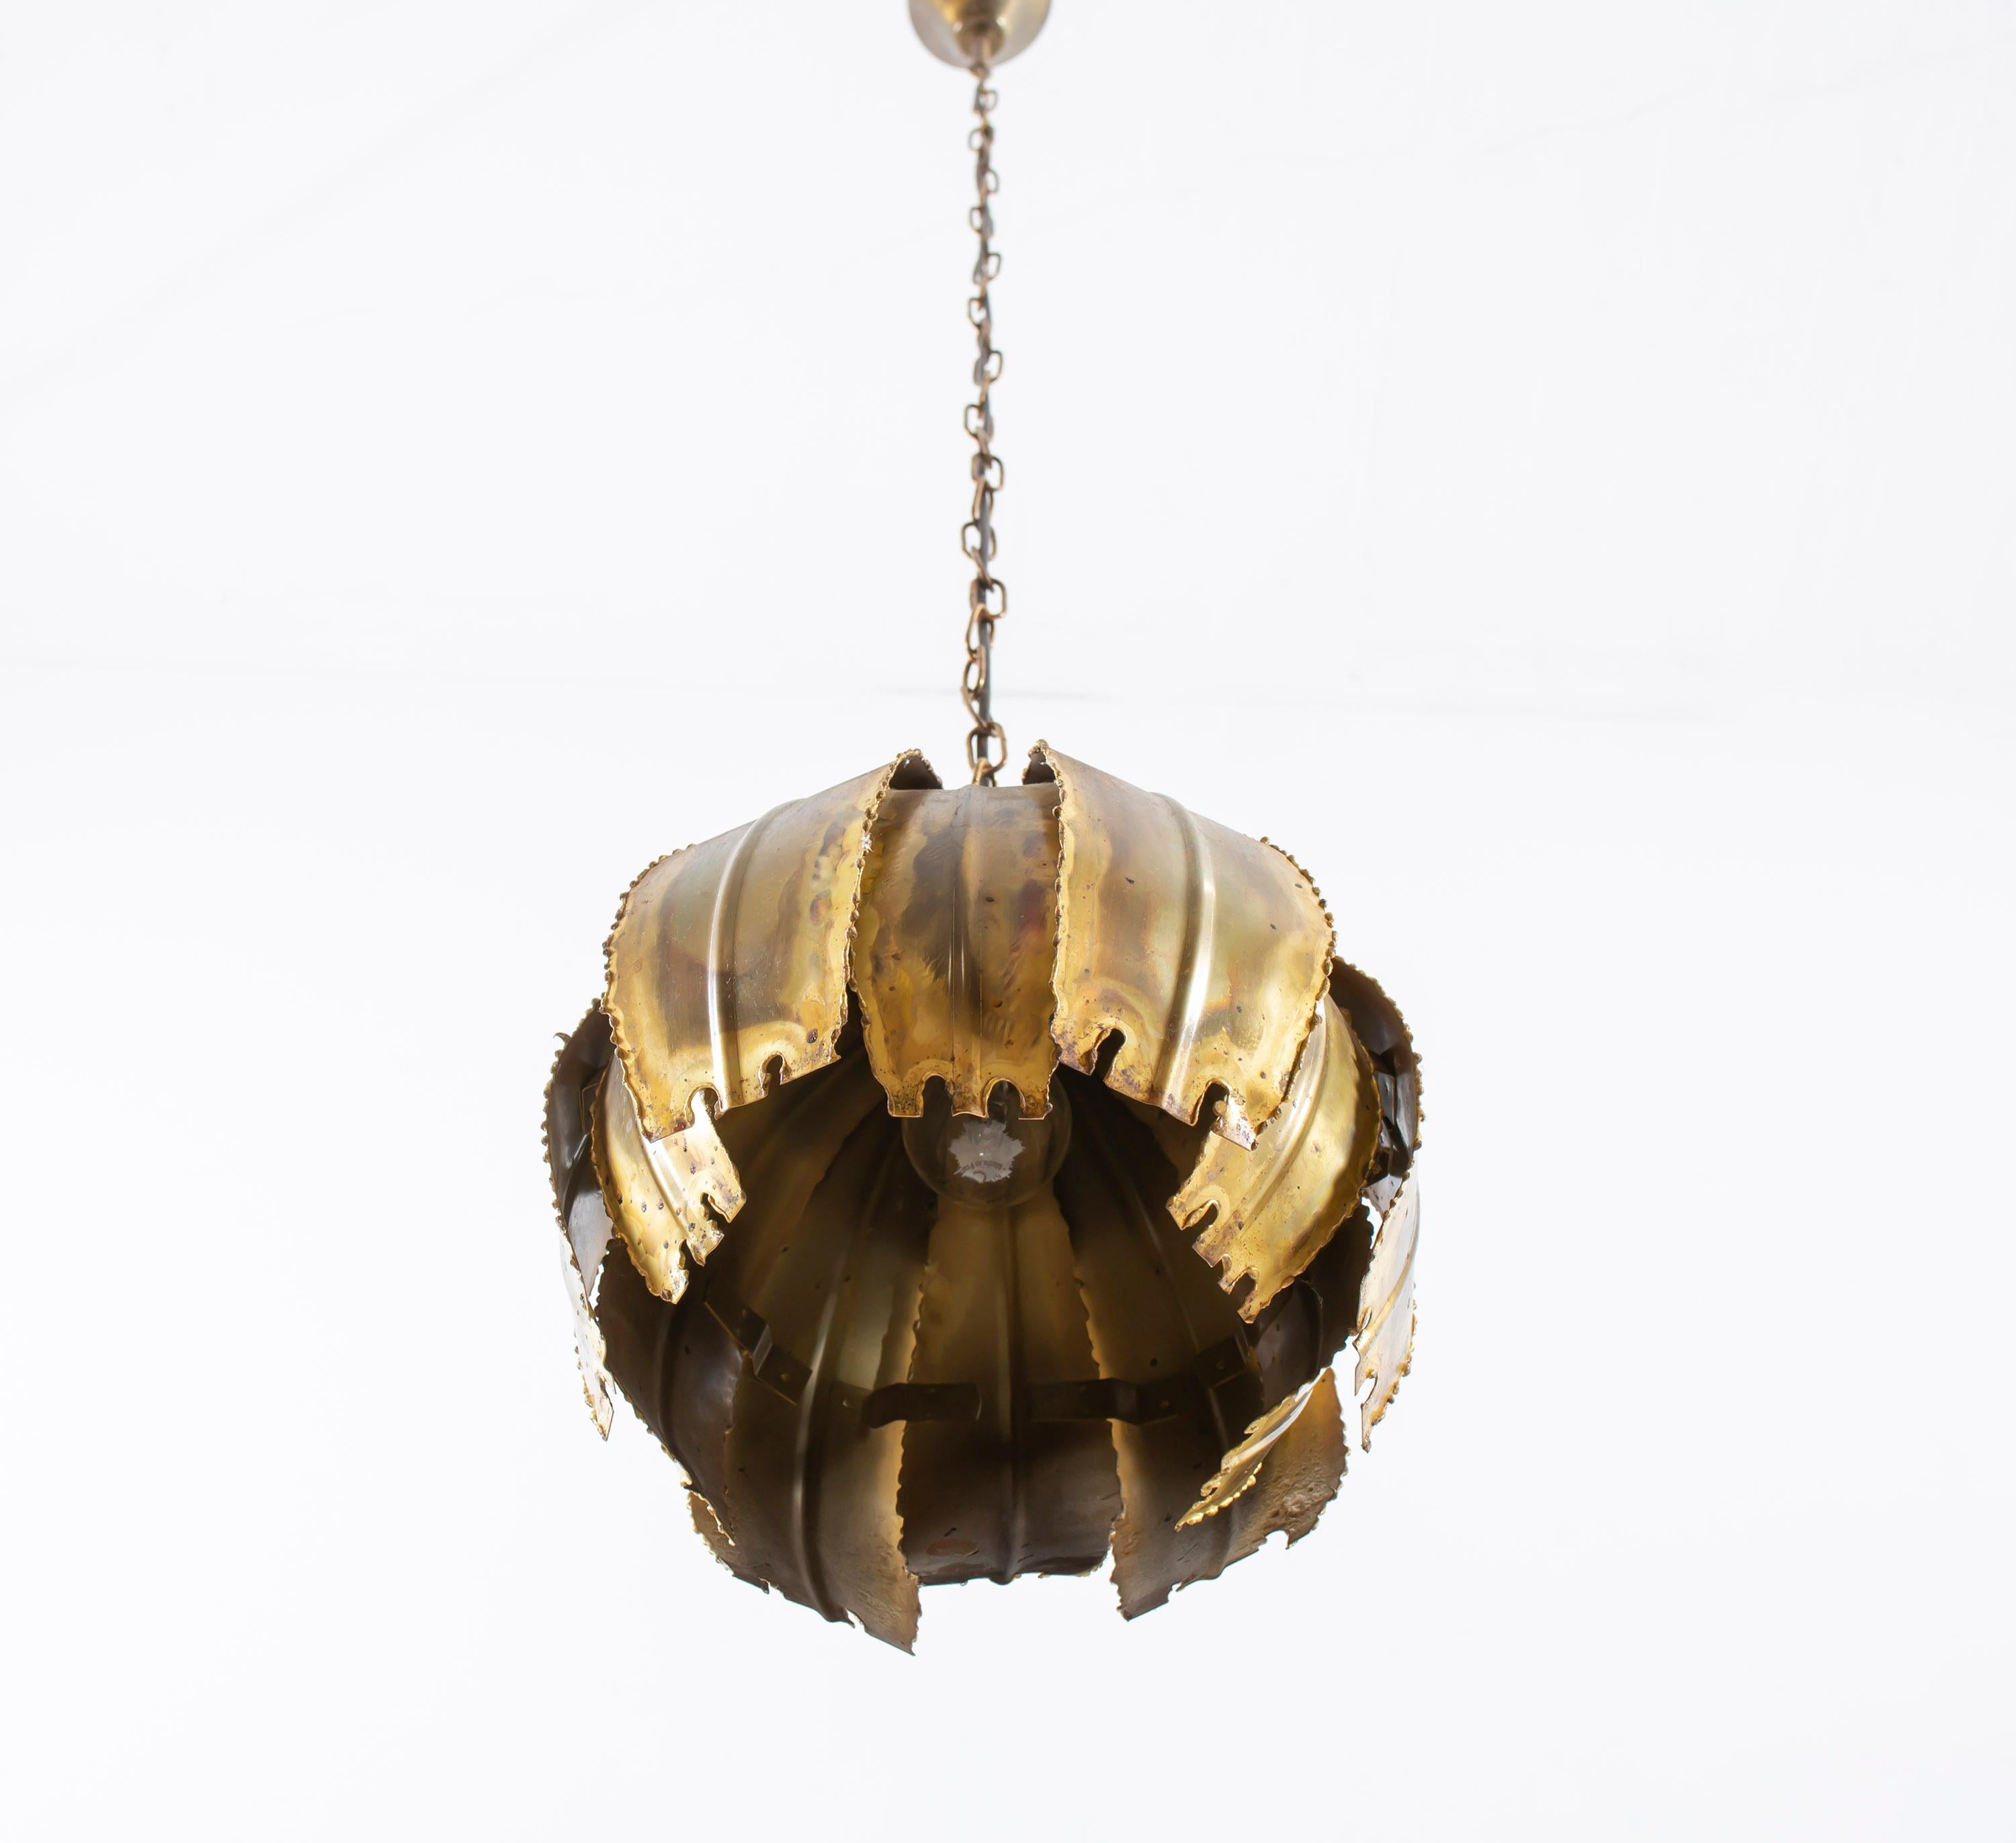 Decorative and rare ceiling pendant in patinated brass. This is model 'Poppy'. Designed by Svend Aage Holm and made in Denmark by Holm Sørensen from circa 1970s second half. The pendant is fully working and in a very good vintage condition. The lamp